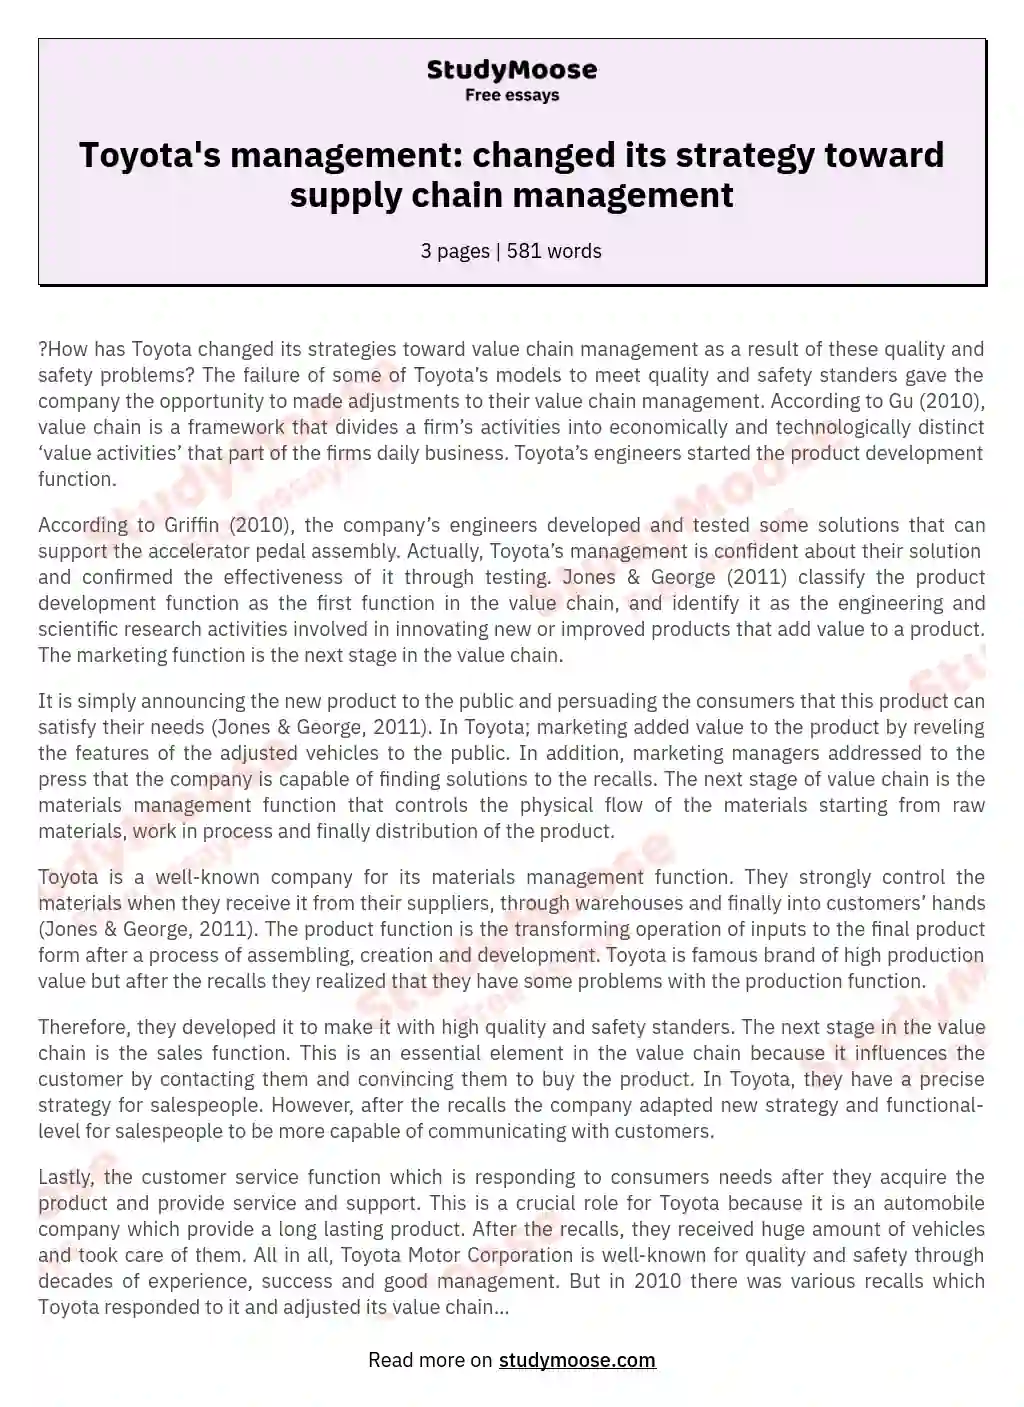 Toyota's management: changed its strategy toward supply chain management essay